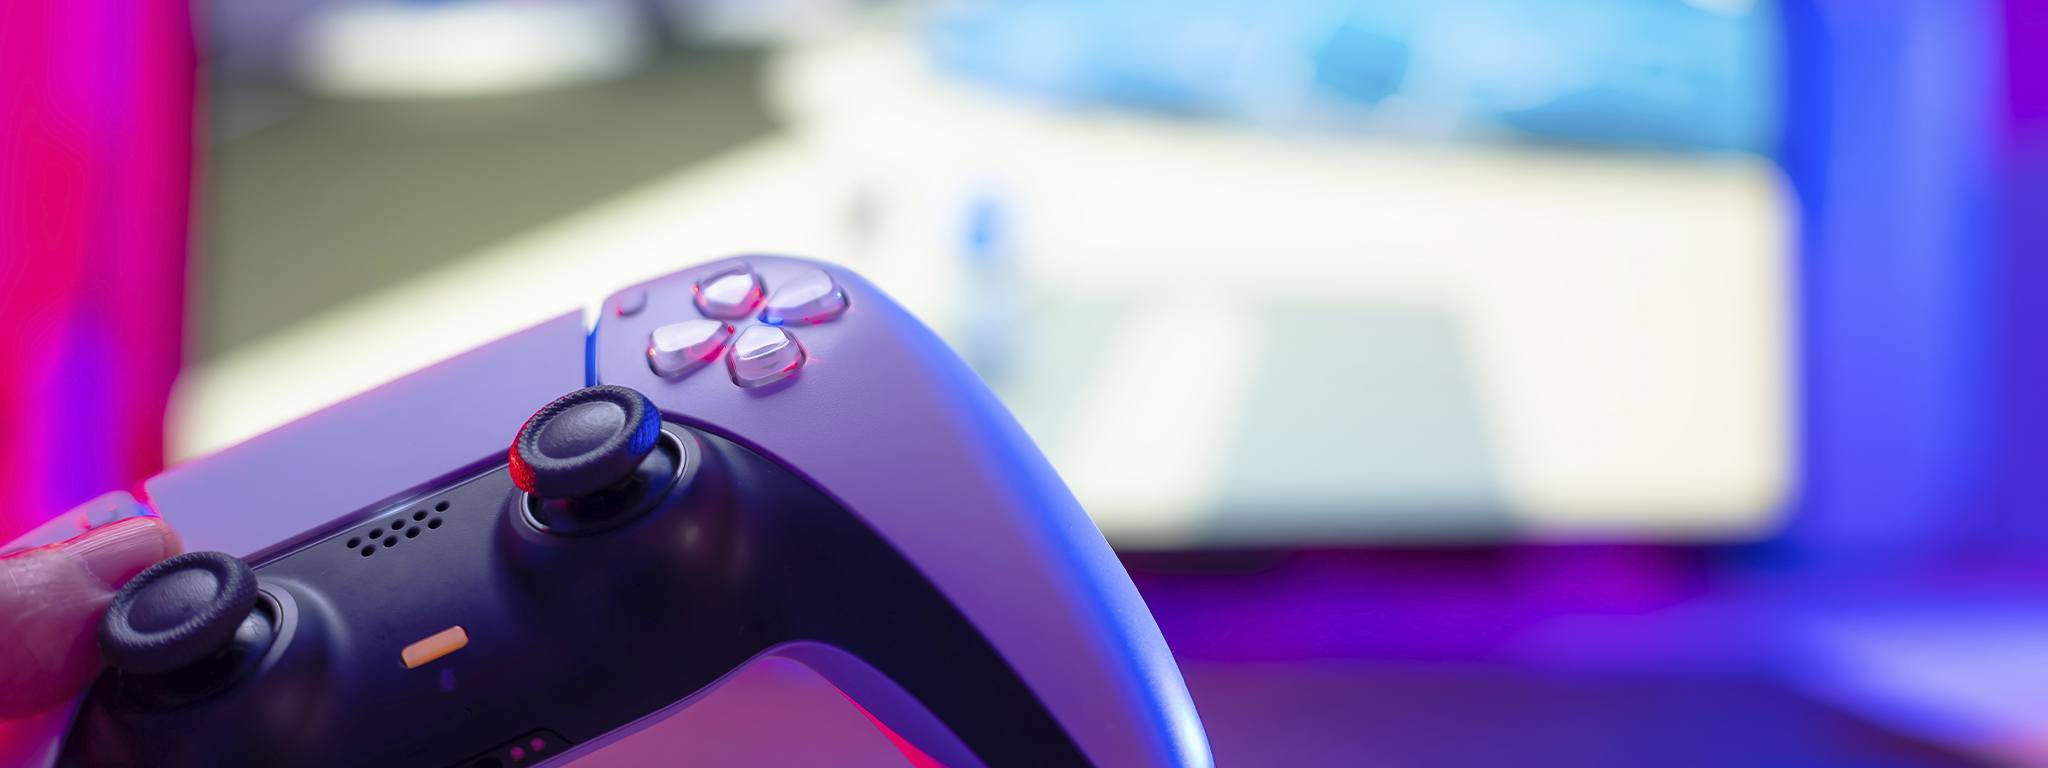 A close-up shot of a PlayStation 5 controller with a blurry background of a game on the TV